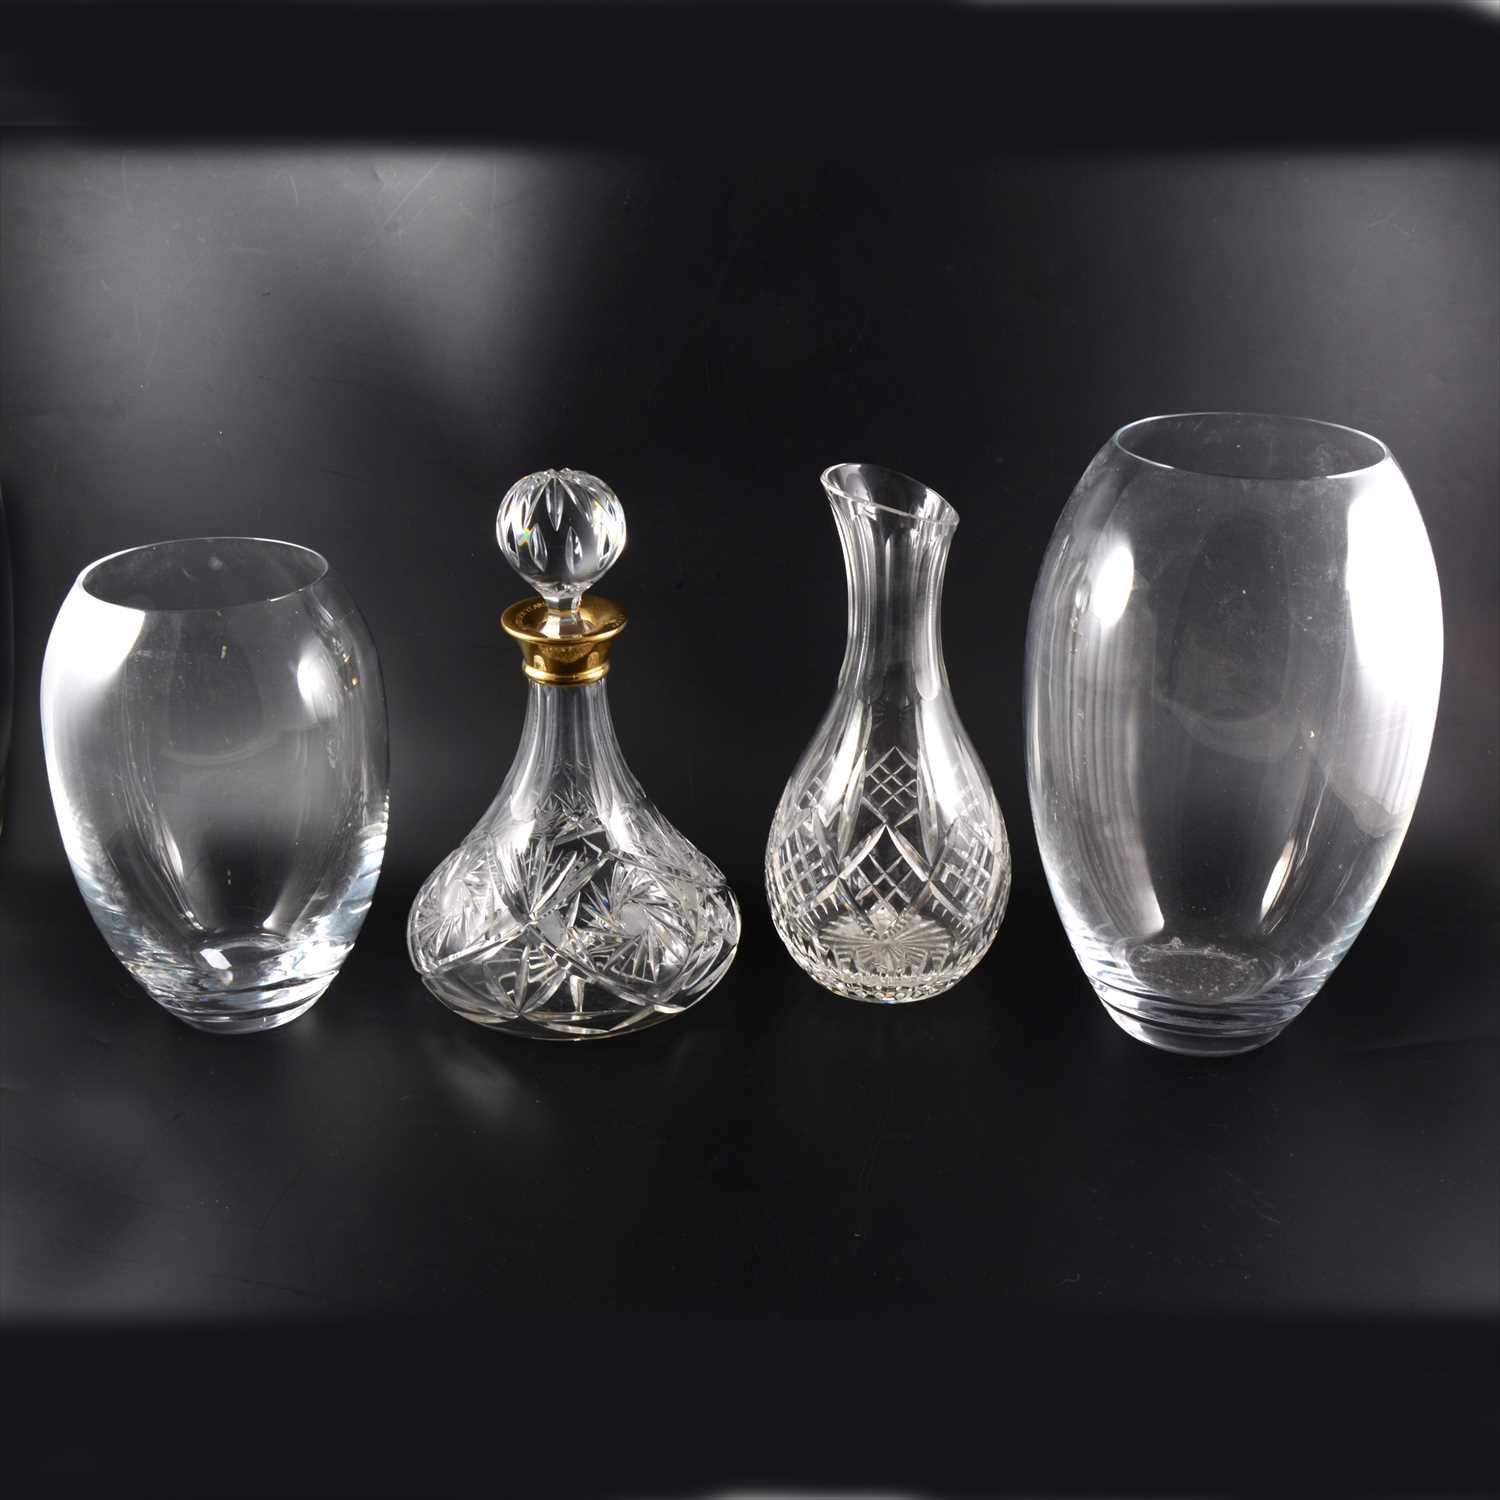 Lot 33 - A pair of Orrefors glass decanters, a pair of Thomas Webb square cut-glass decanters, etc